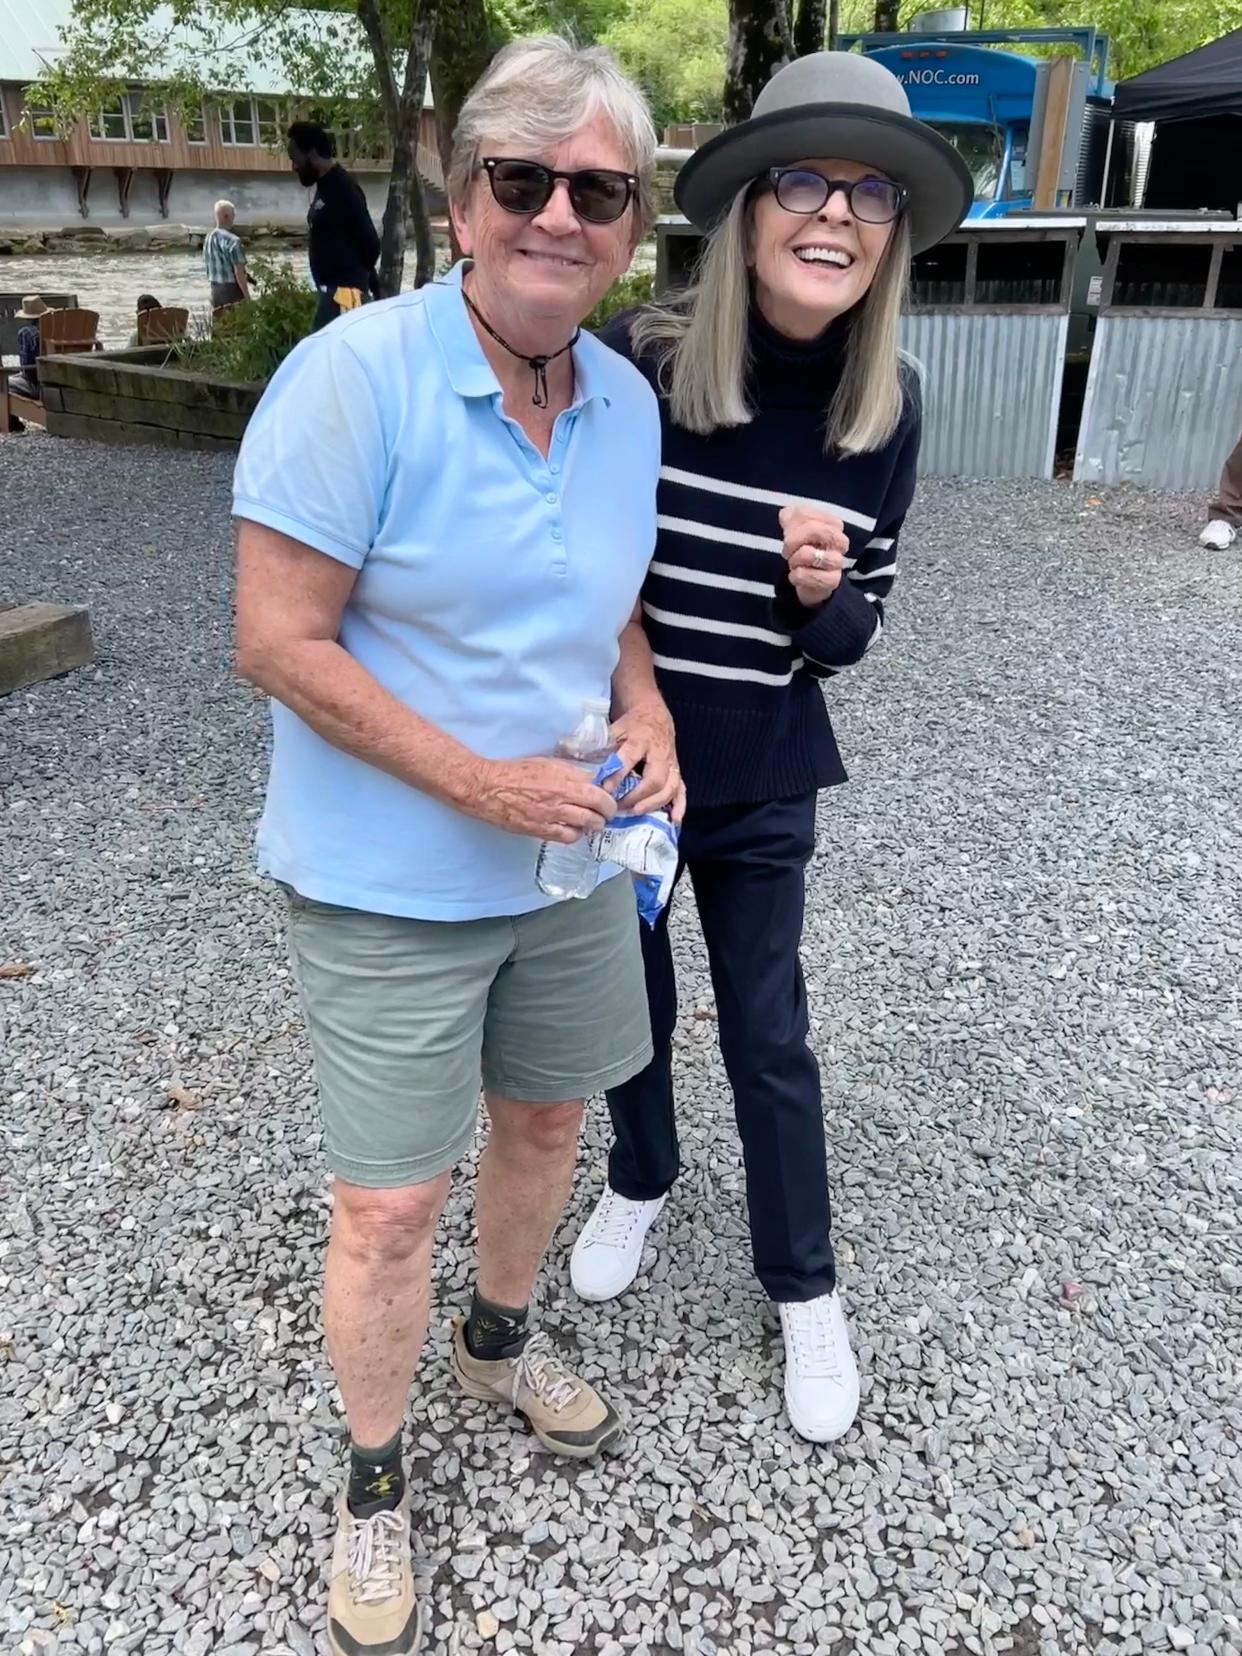 "Summer Camp" extra Ann Whisenhunt poses with star Diane Keaton at the filming of the movie at Camp Pinnacle in Hendersonville last year.